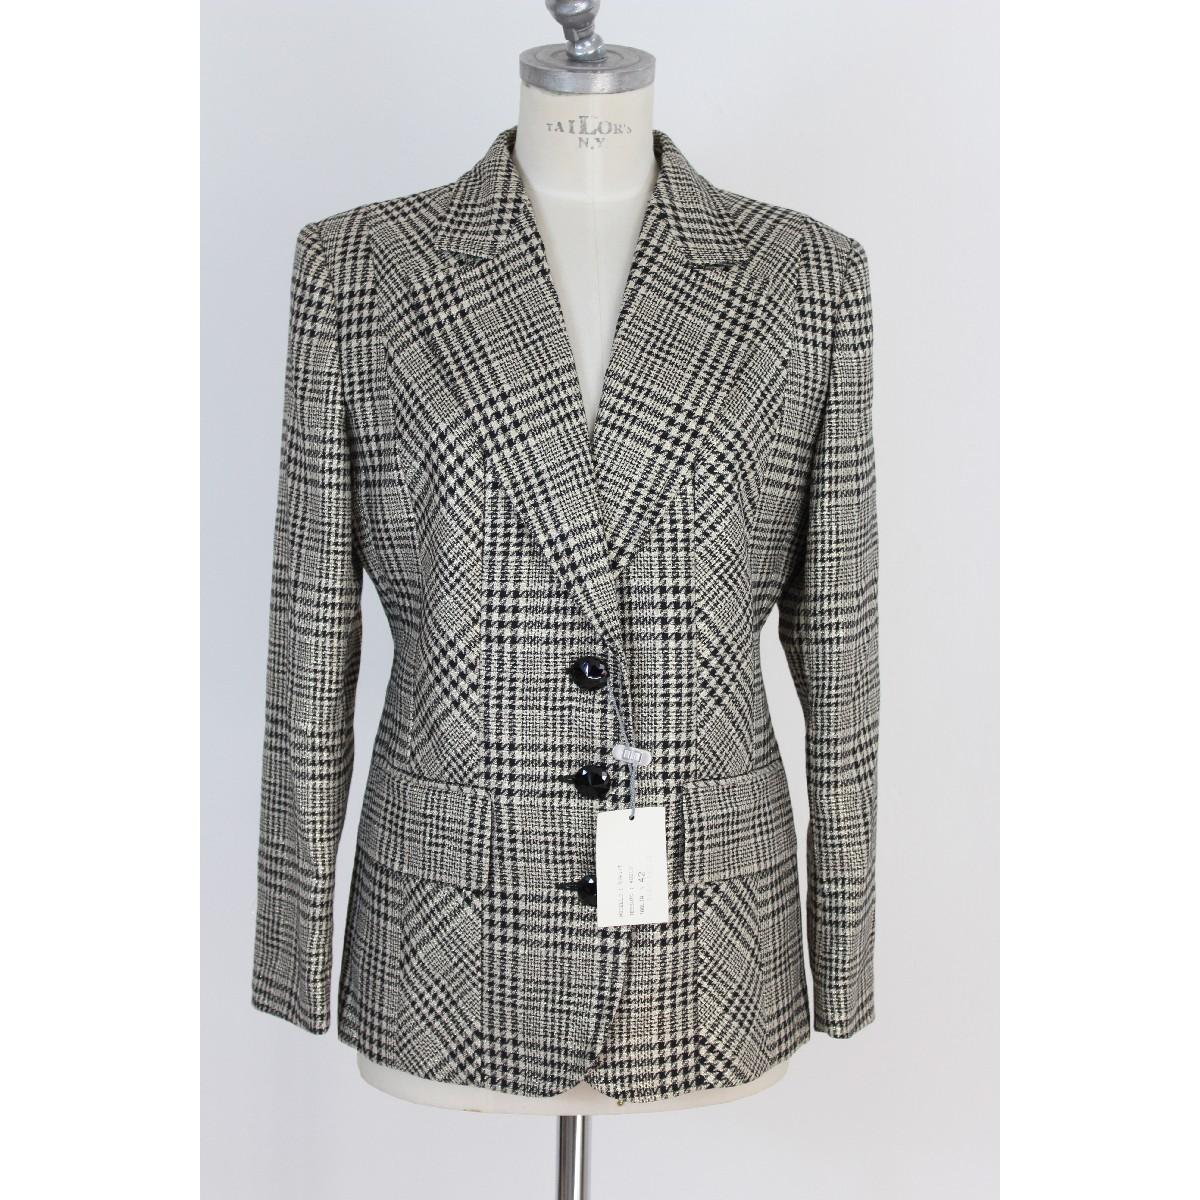 Valentino Houndstooth Gray Wool Check Skirt Suit Dress 1990s NWT Size 10 Us 2